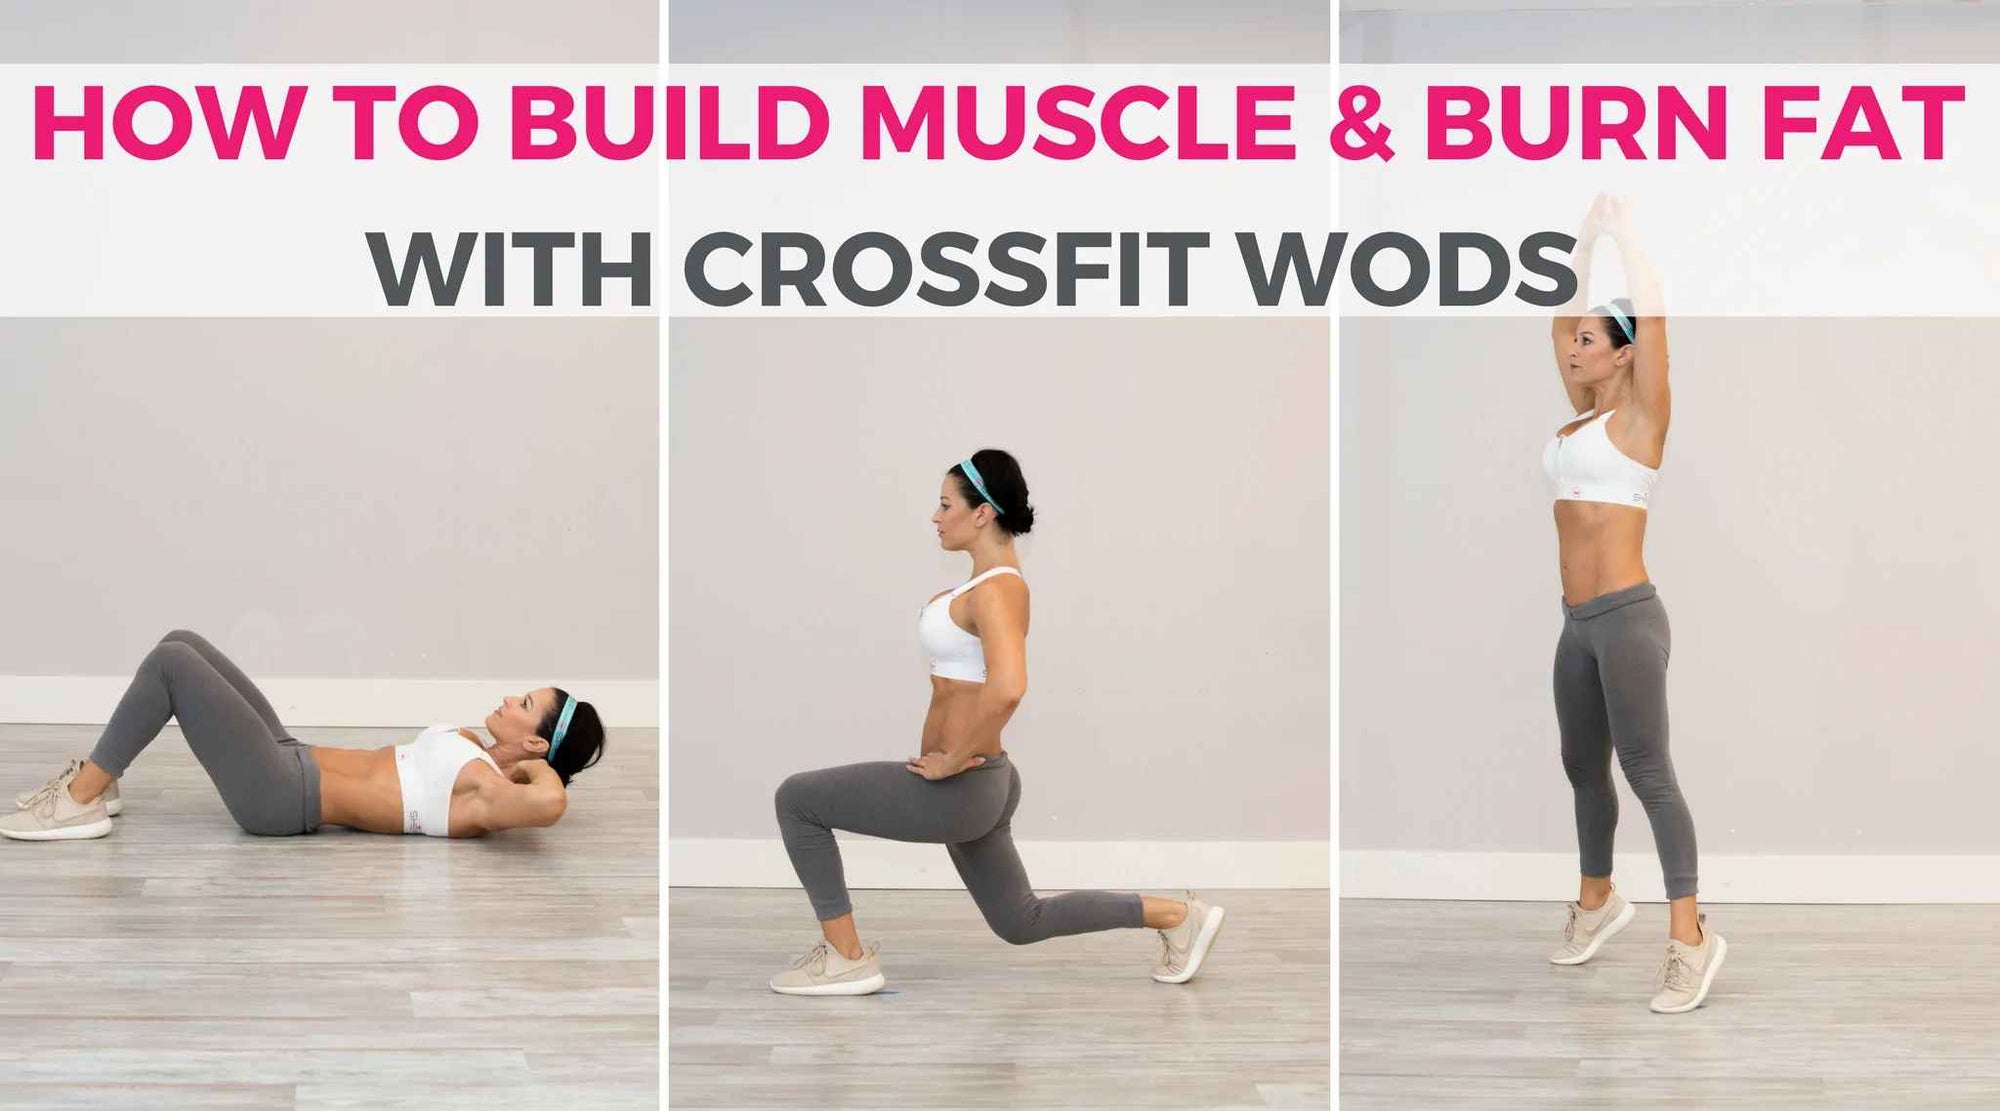 Low impact, beginner, fat burning, home cardio workout. ALL